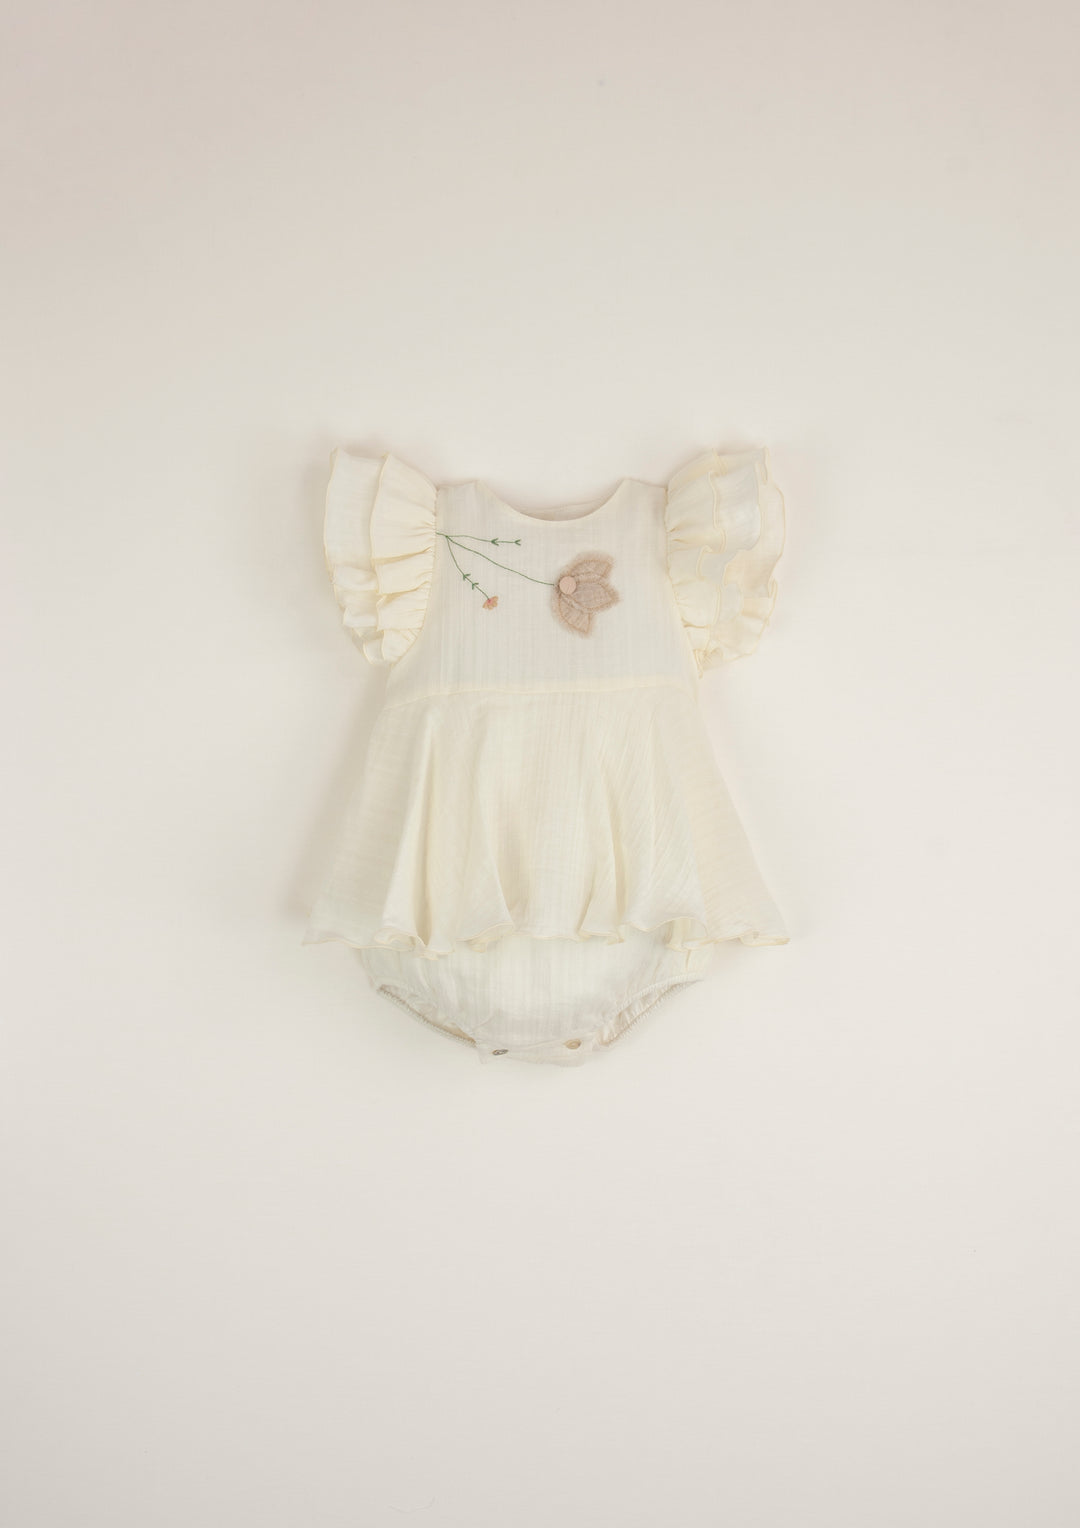 9.1 off-white romper suit w/ cape-style skirt